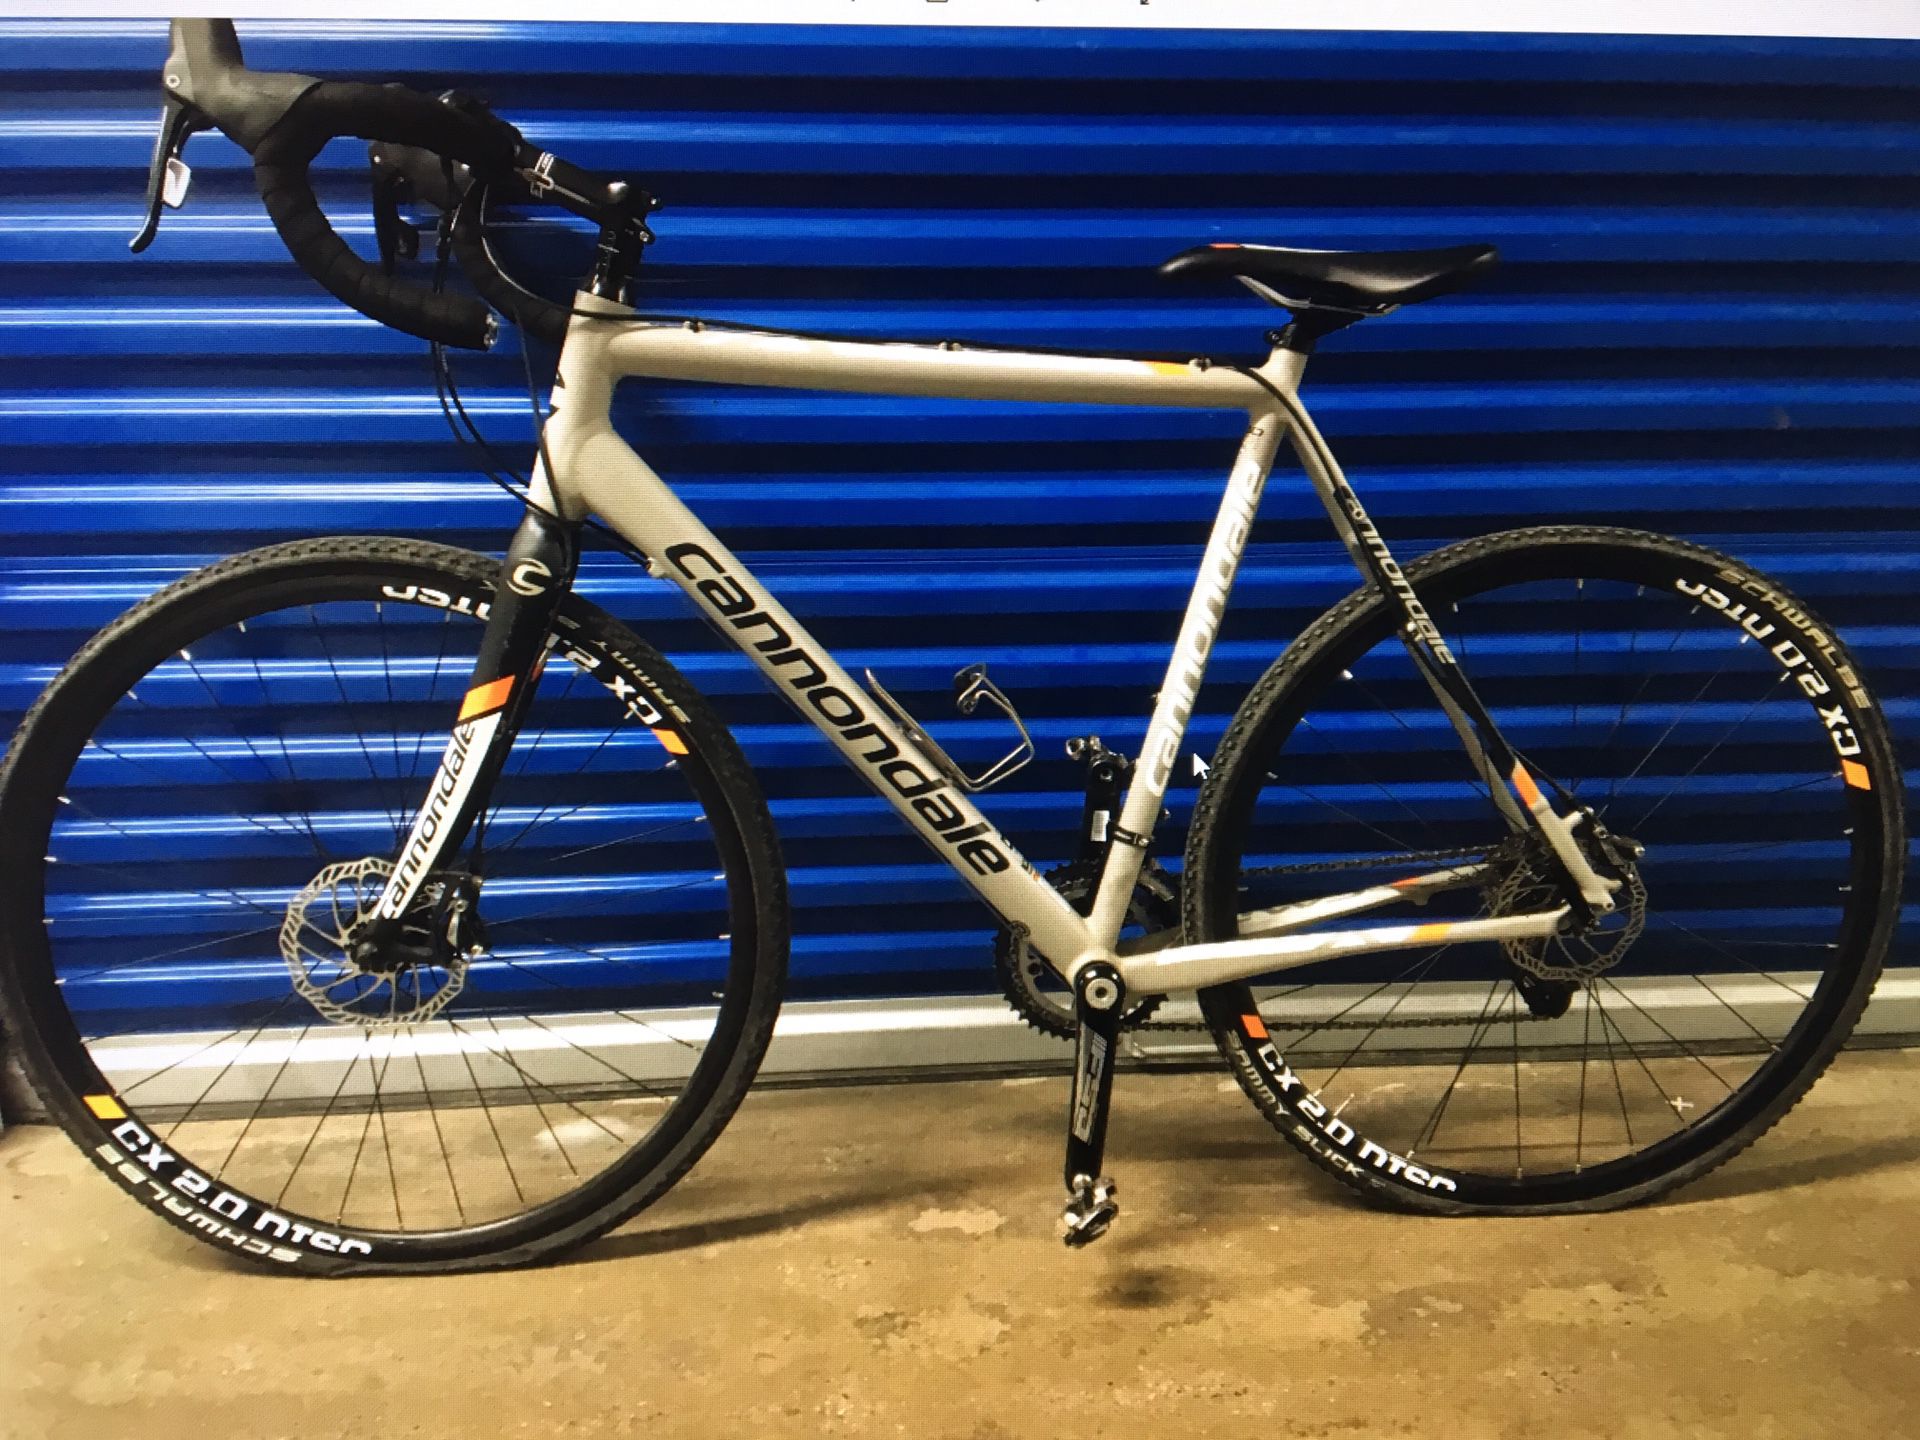 2015 Cannondale CAADX Disc Rival Bicycle asking price $475